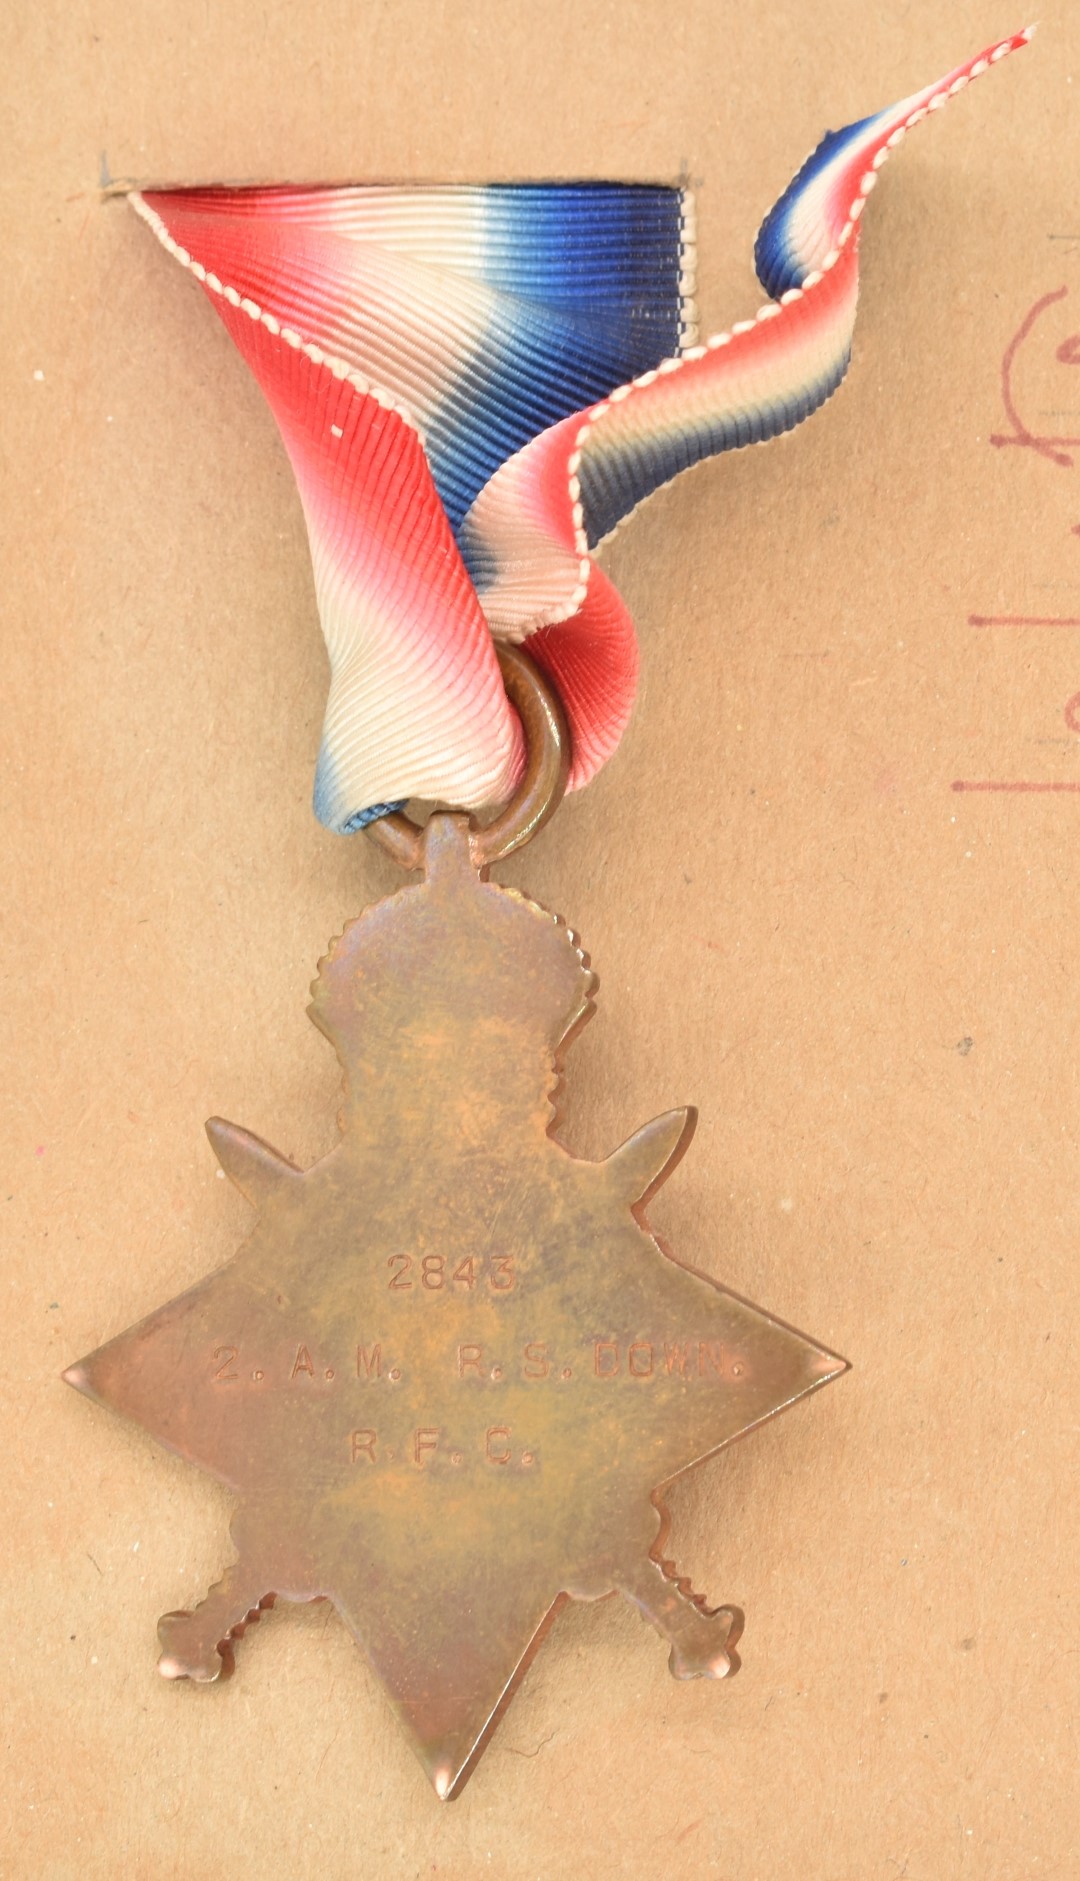 WW1 Royal Flying Corps 1914/1915 Star medal named to 2843 2. A. M. R S Down, RFC with copy of - Image 2 of 2